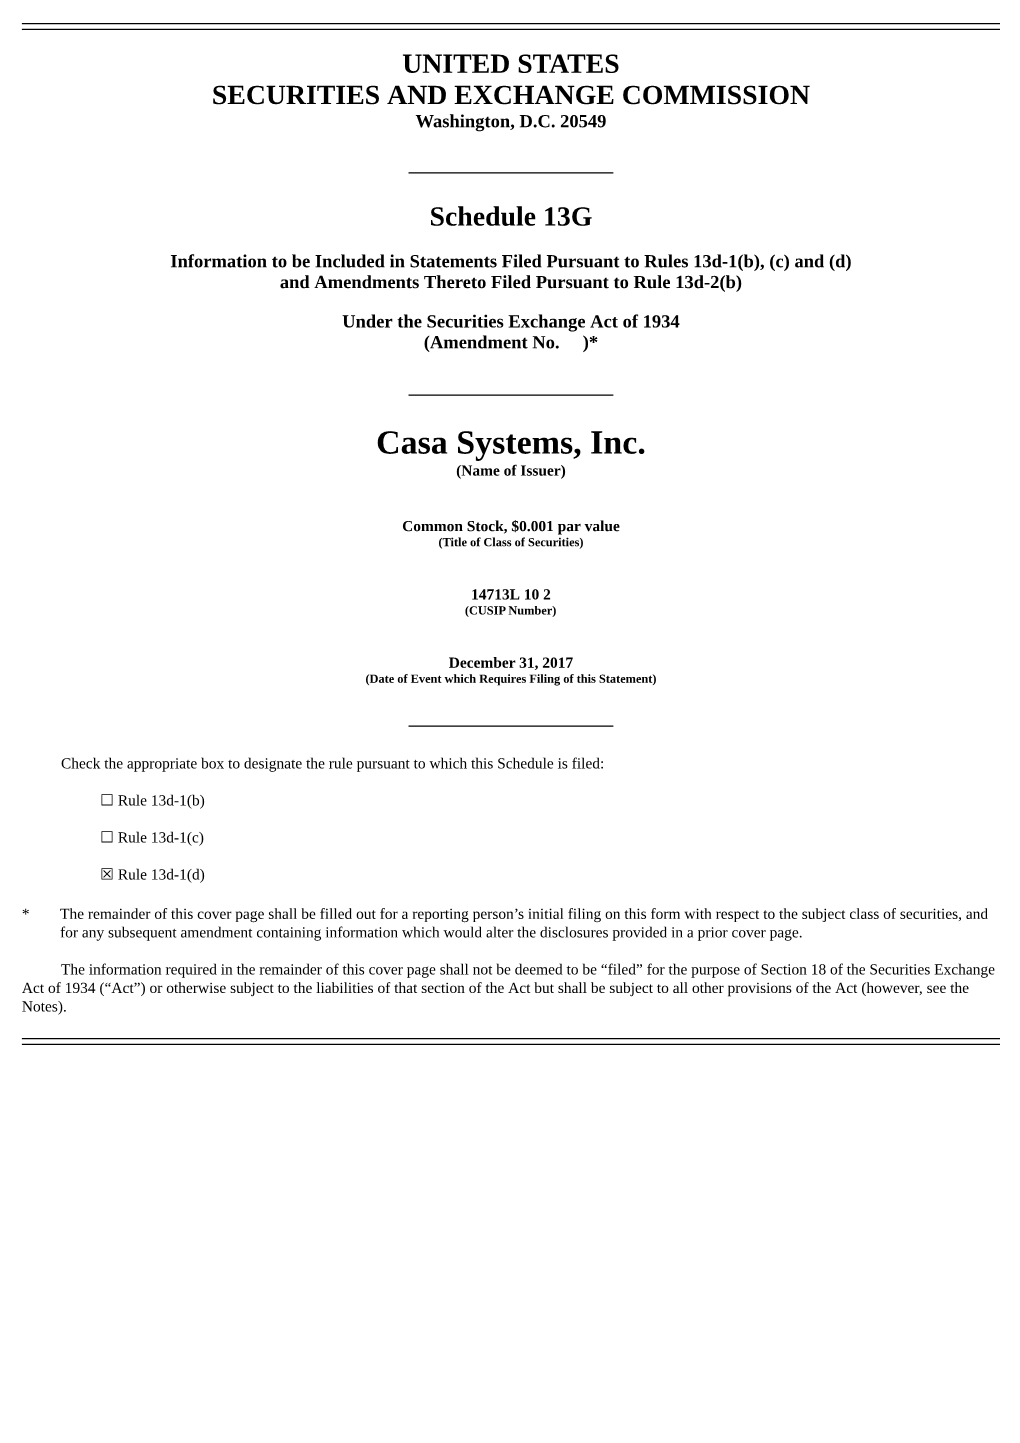 Casa Systems, Inc. (Name of Issuer)